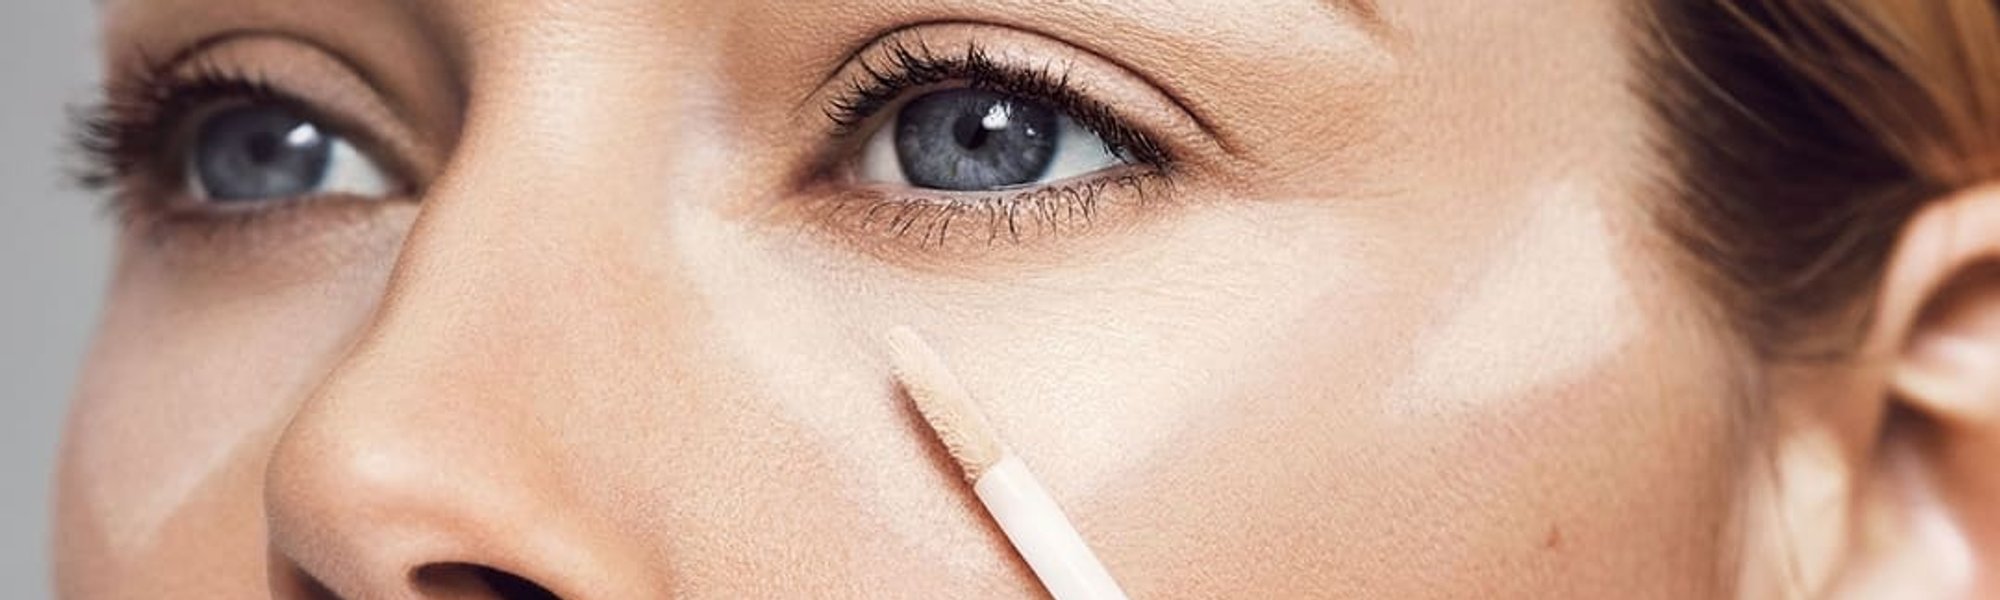 How To Pick The Right Concealer For Your Skin Tone 1080x476